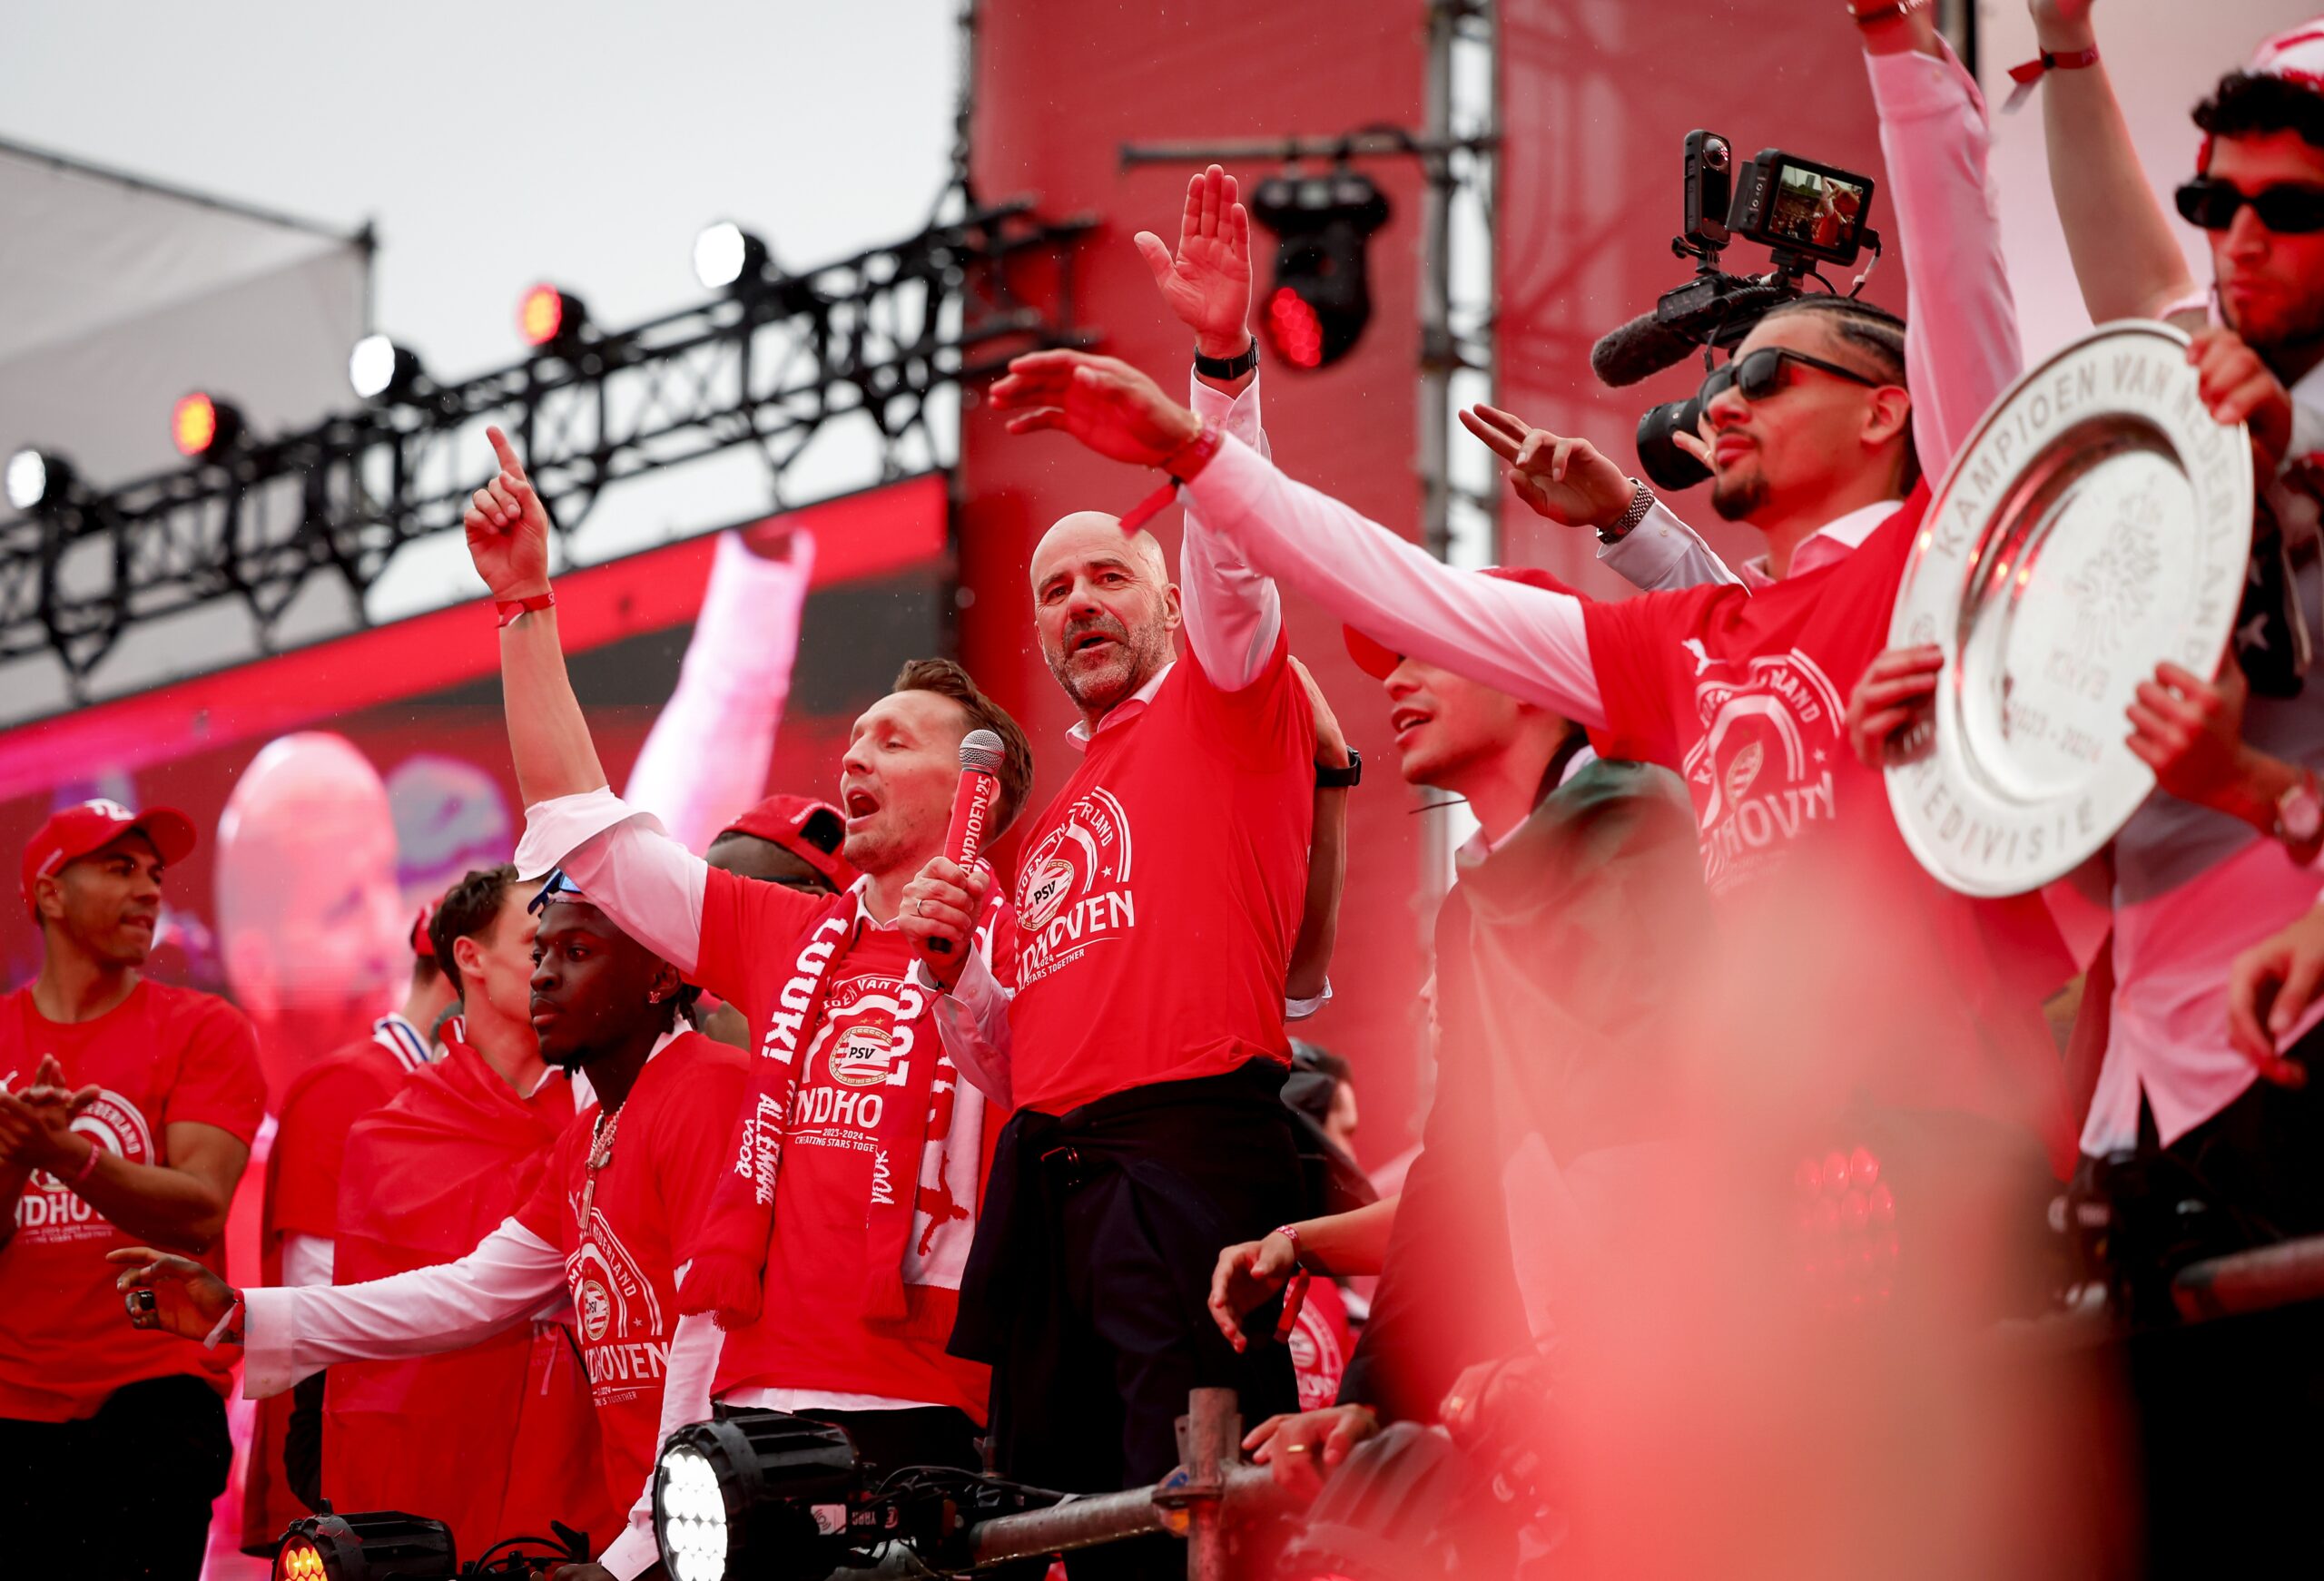 PSV fans pack town hall square to celebrate 25th league title